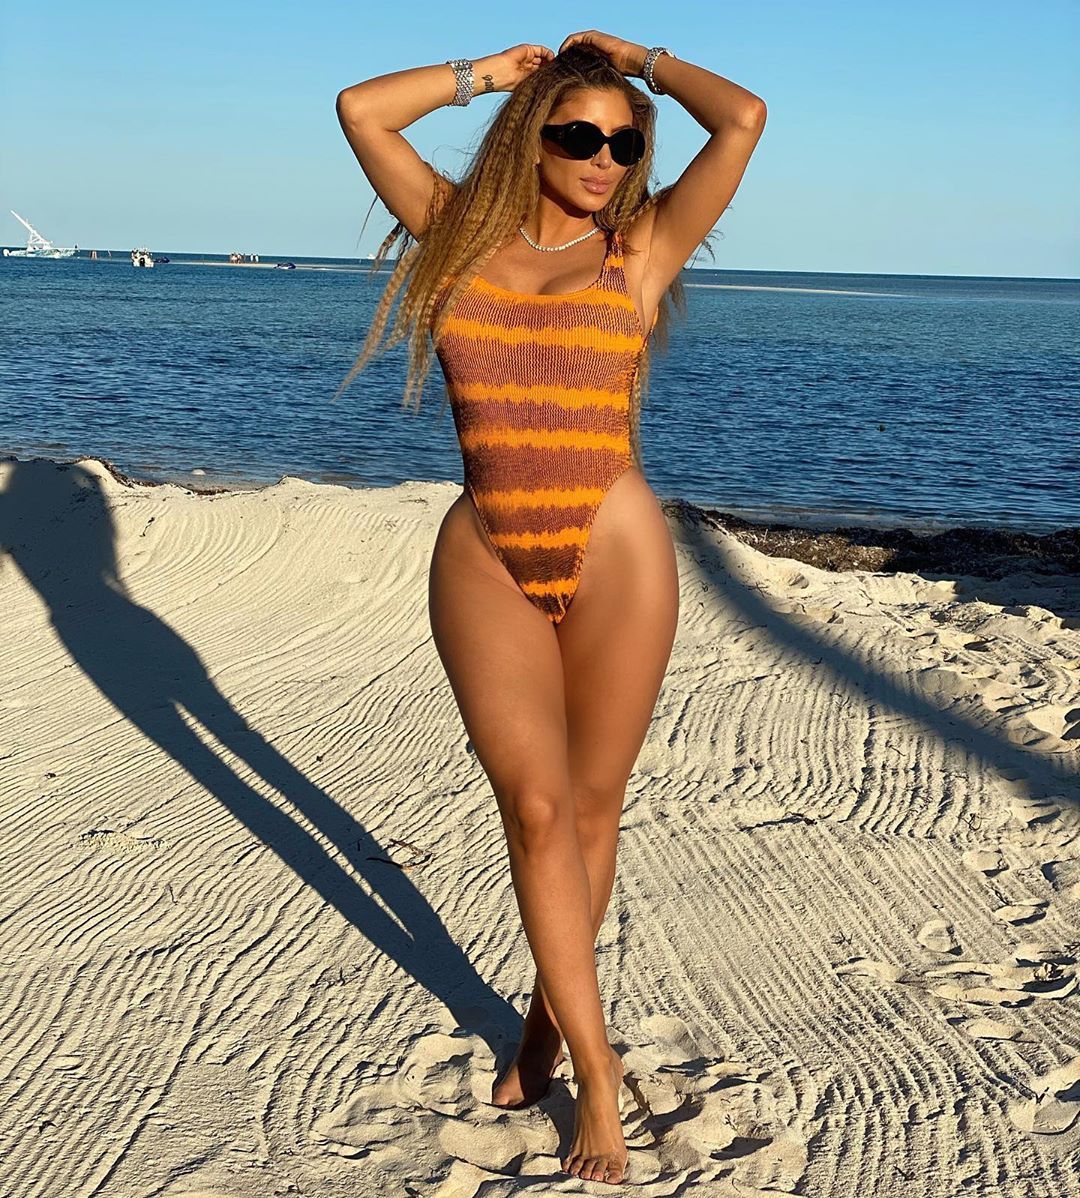 Larsa Pippen poses on the beach in a swimsuit